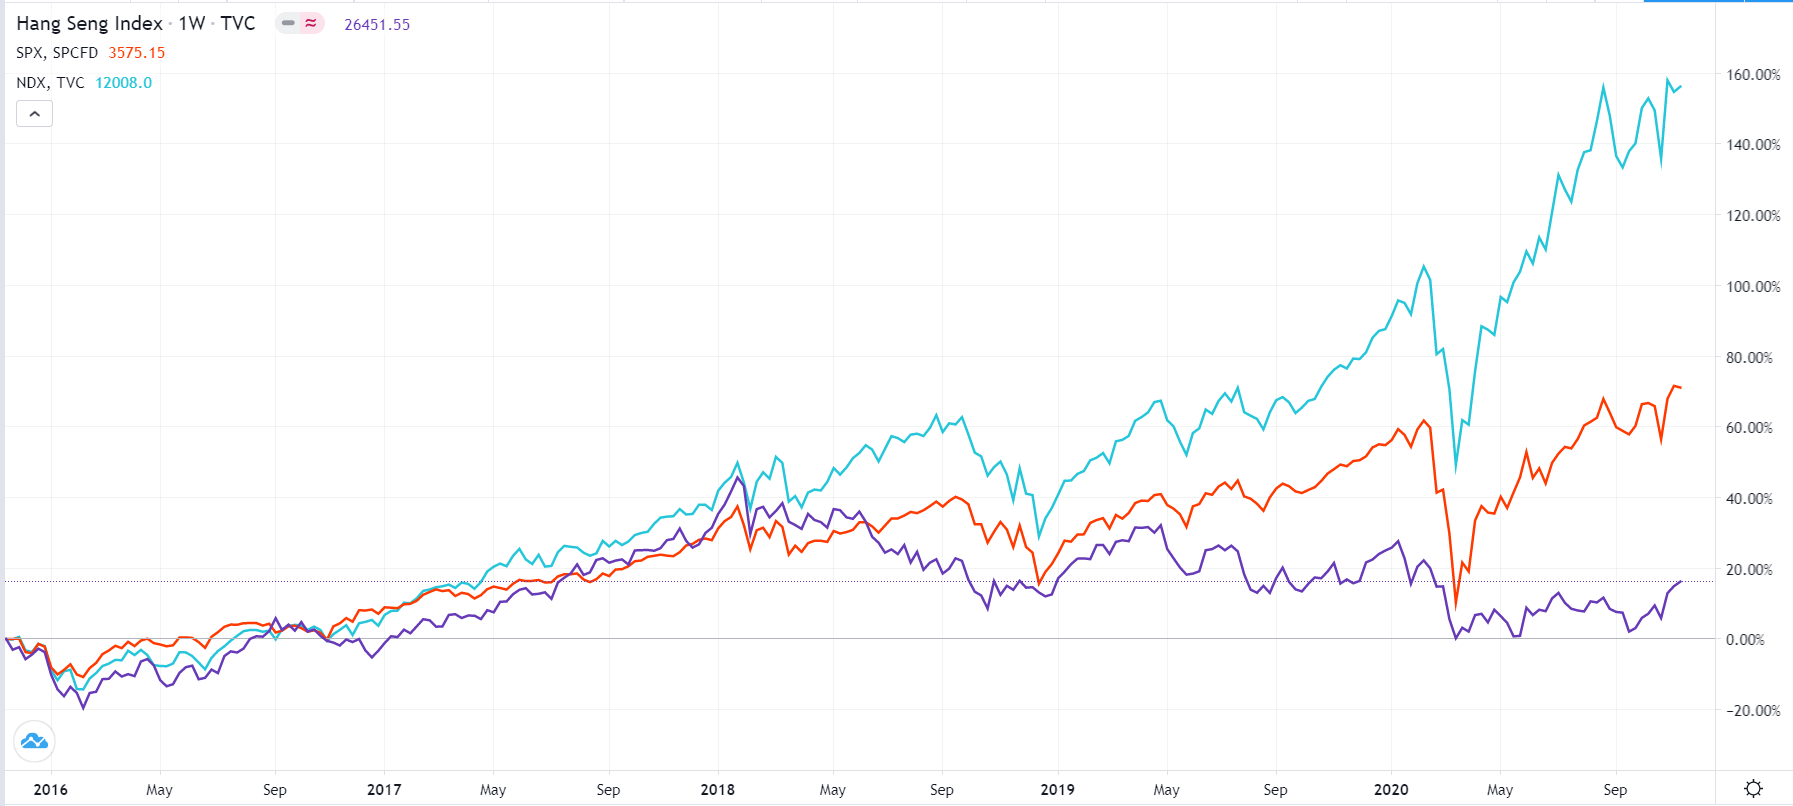 Hang Seng has underperformed the S&P 500 and Nasdaq 100 in the past five years